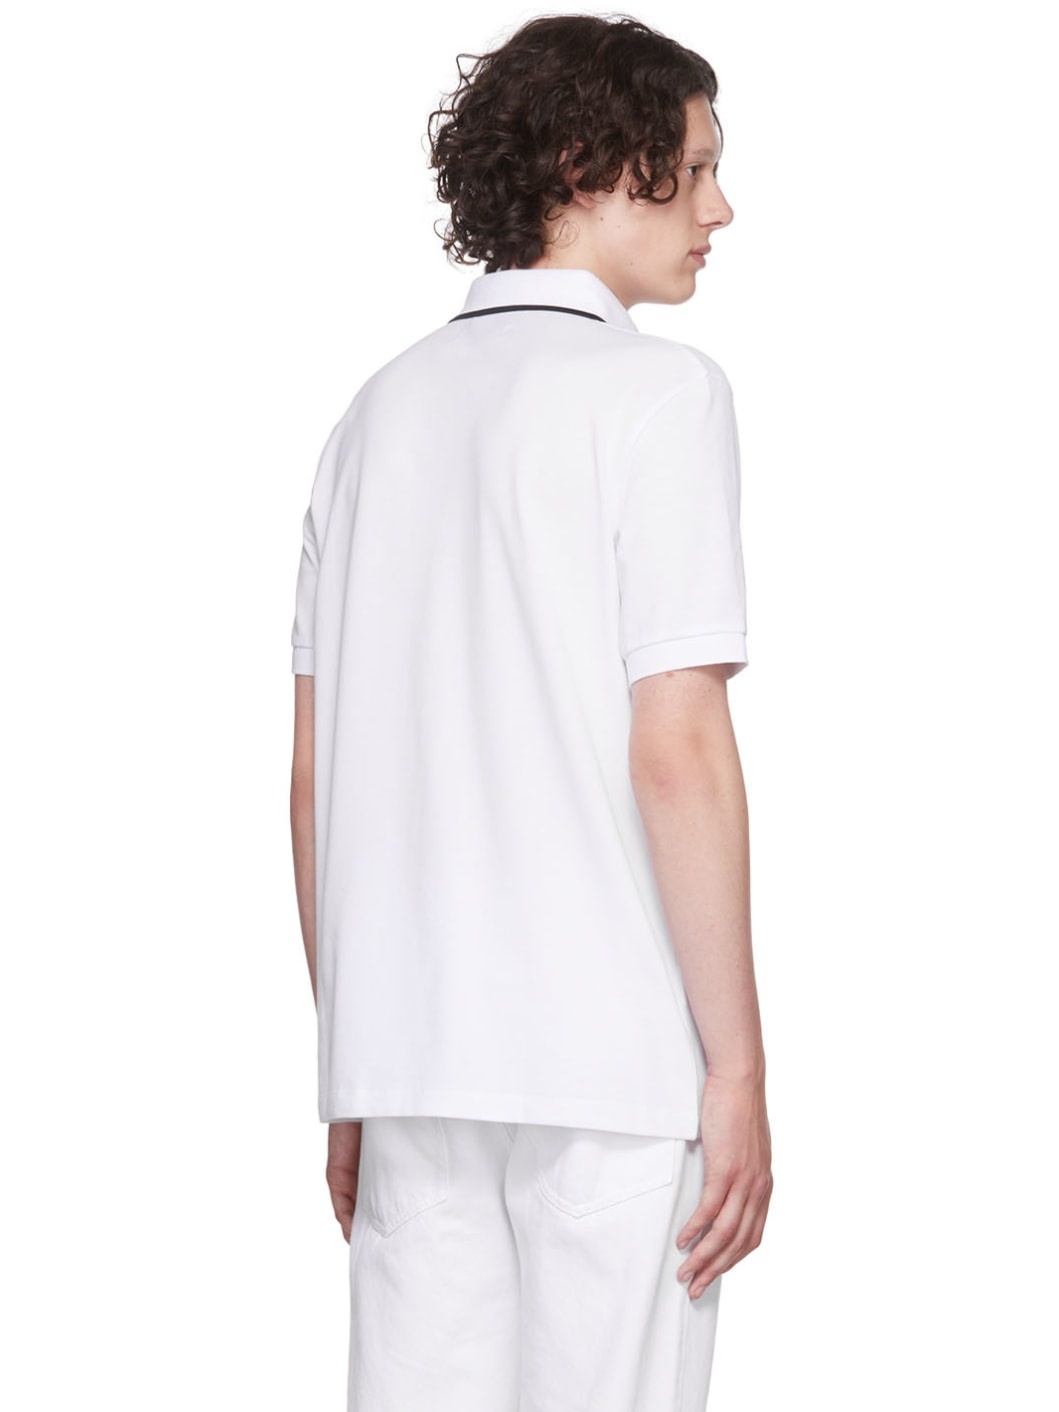 White Patched Polo - 3